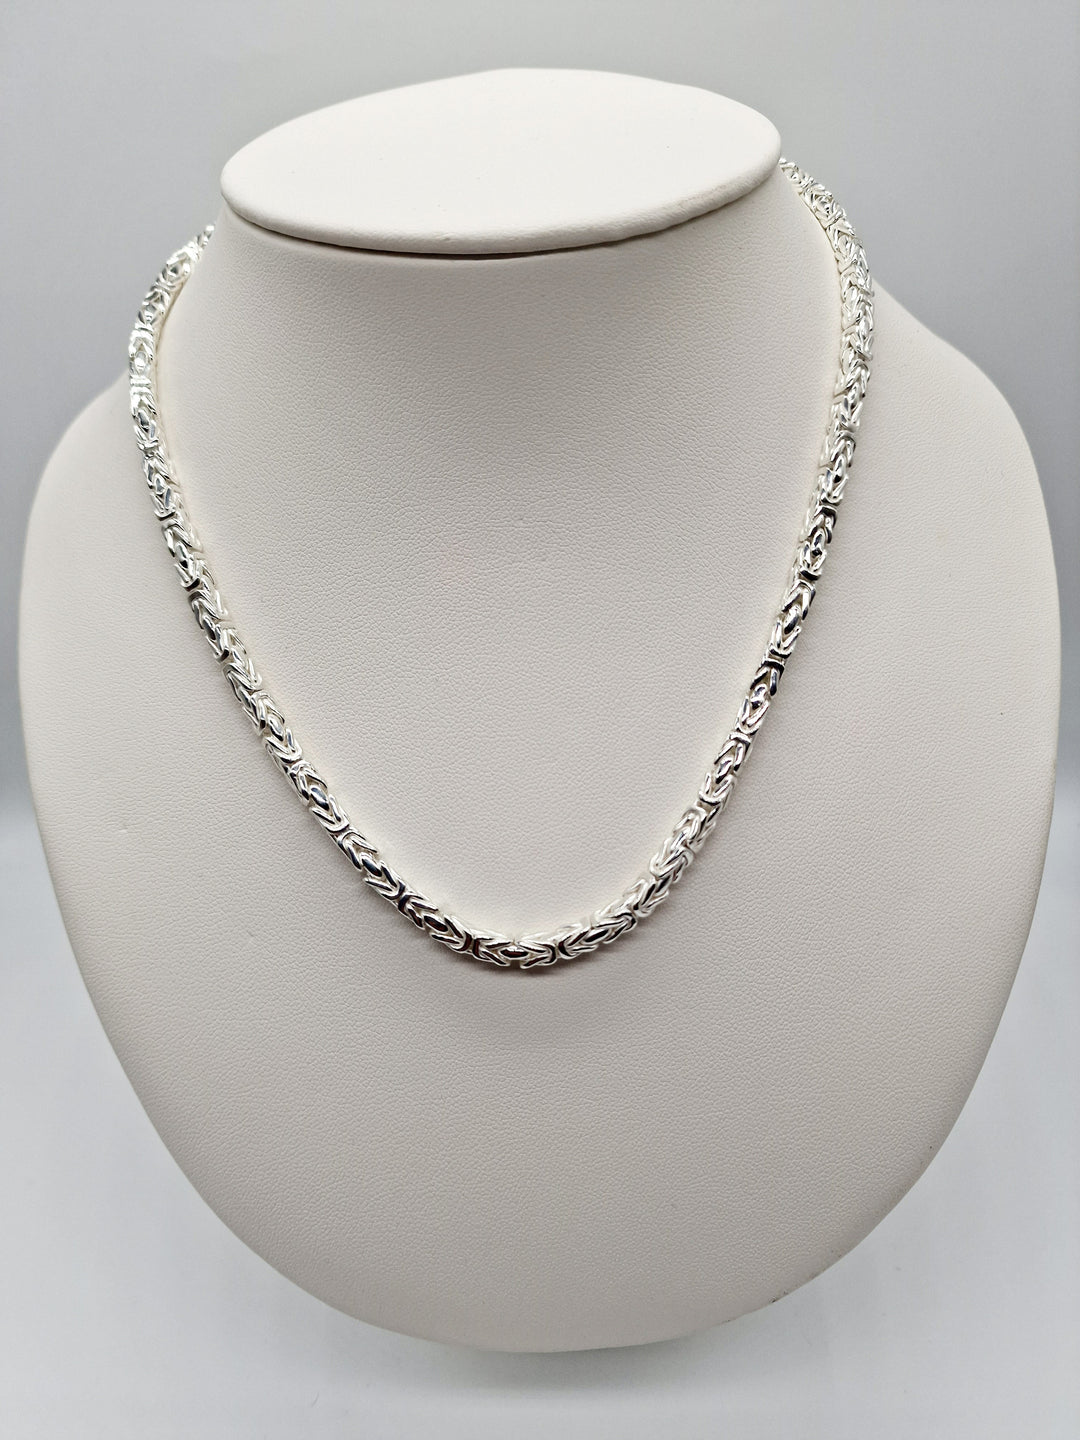 Men's Chunky Chain Necklace